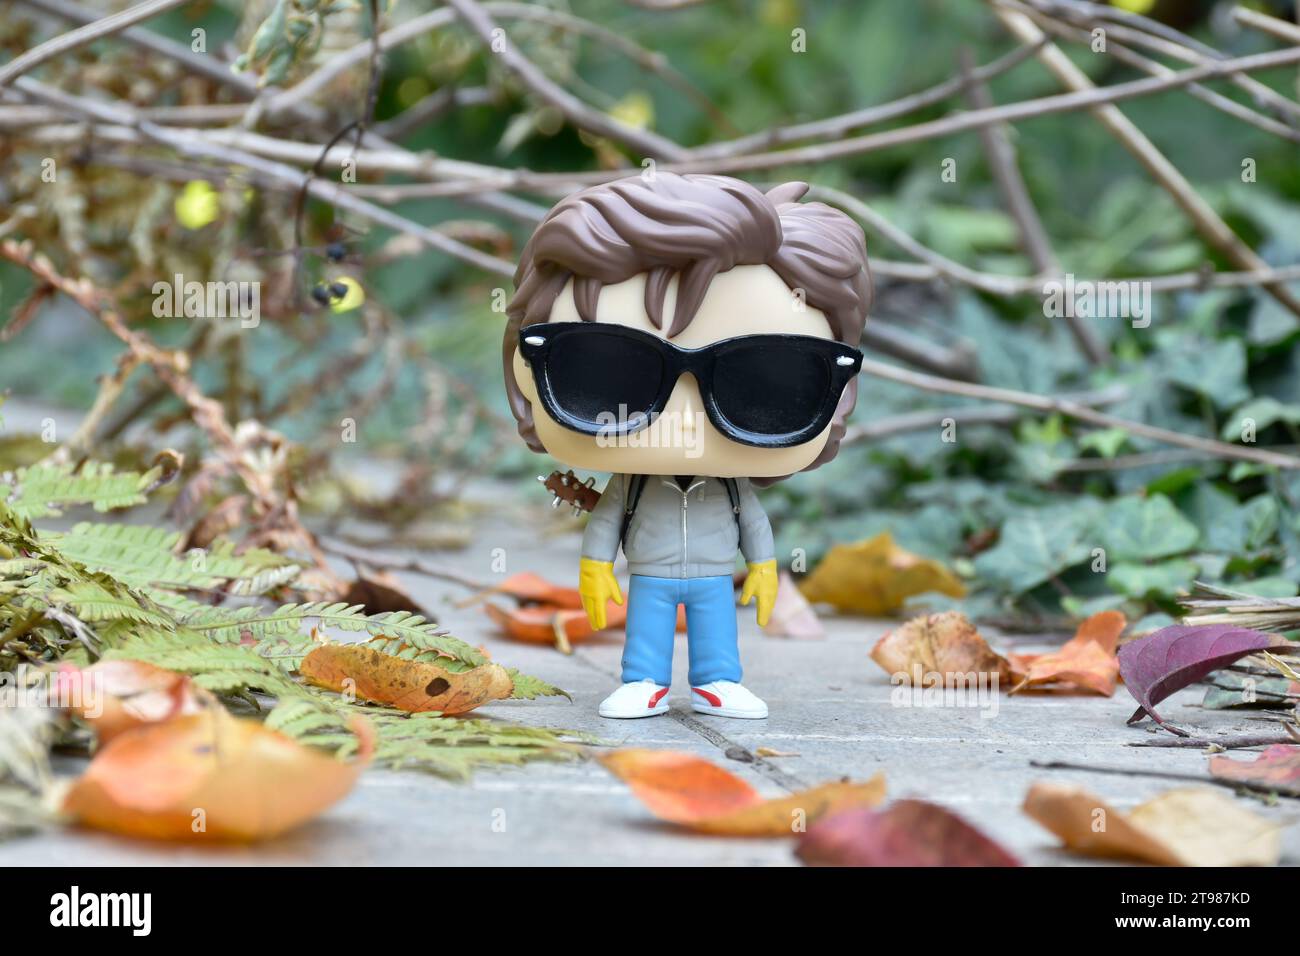 Funko Pop action figure of Steve with sunglasses from popular Netflix TV series Stranger Things. Abandoned road, autumn forest, leaves, tree branches. Stock Photo